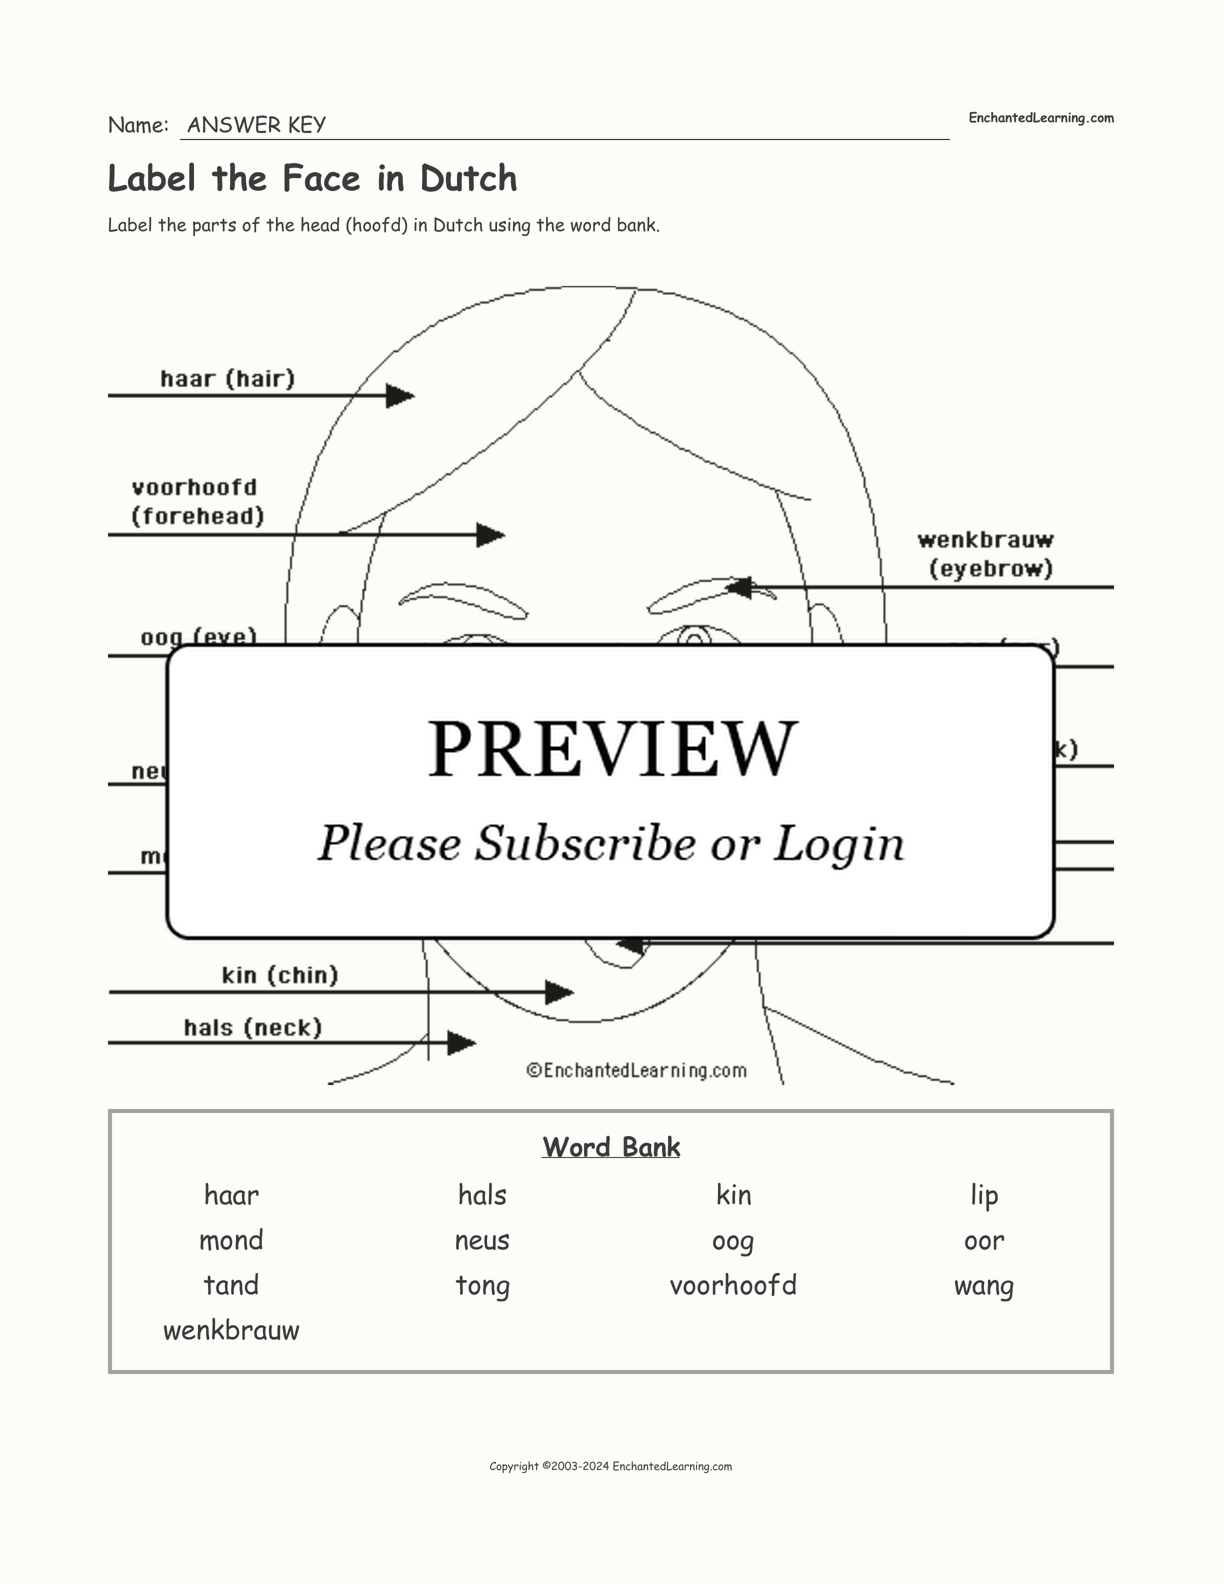 Label the Face in Dutch interactive worksheet page 2